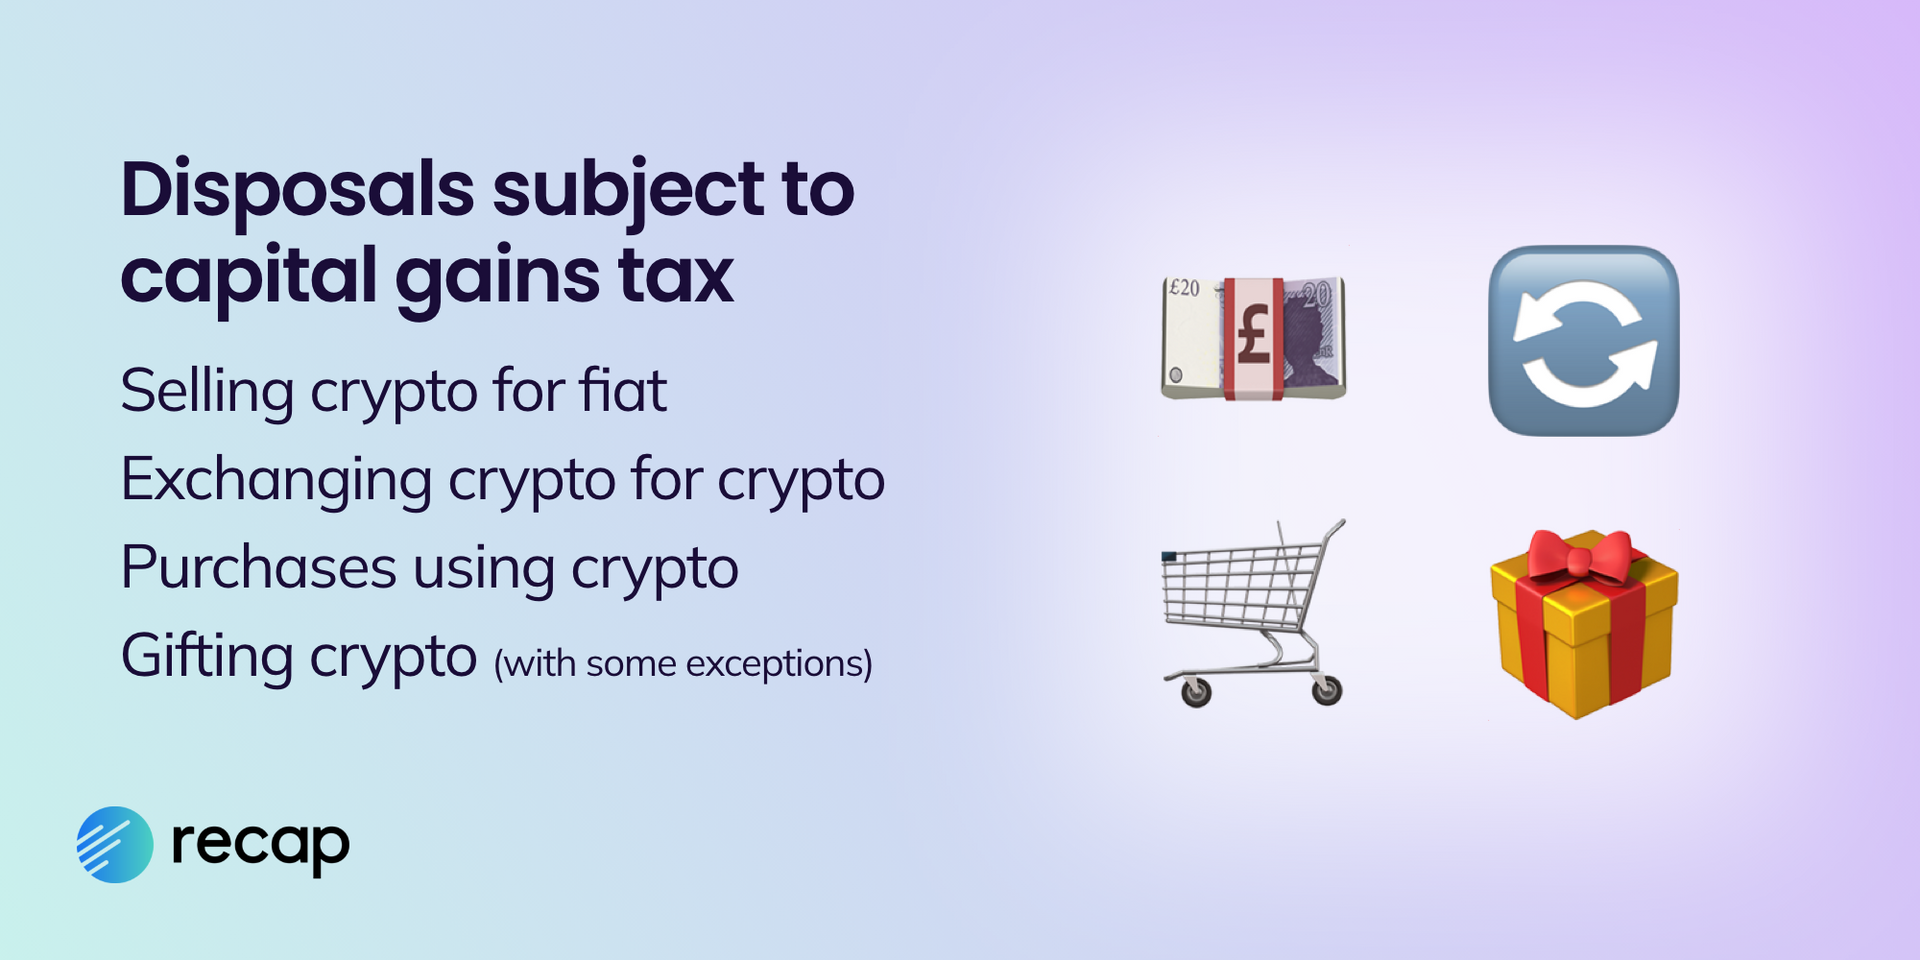 Infographic explaining that disposals subject to capital gains tax include selling crypto for fiat, exchanging crypto for crypto, purchases using crypto and gifting crypto (with some exceptions).